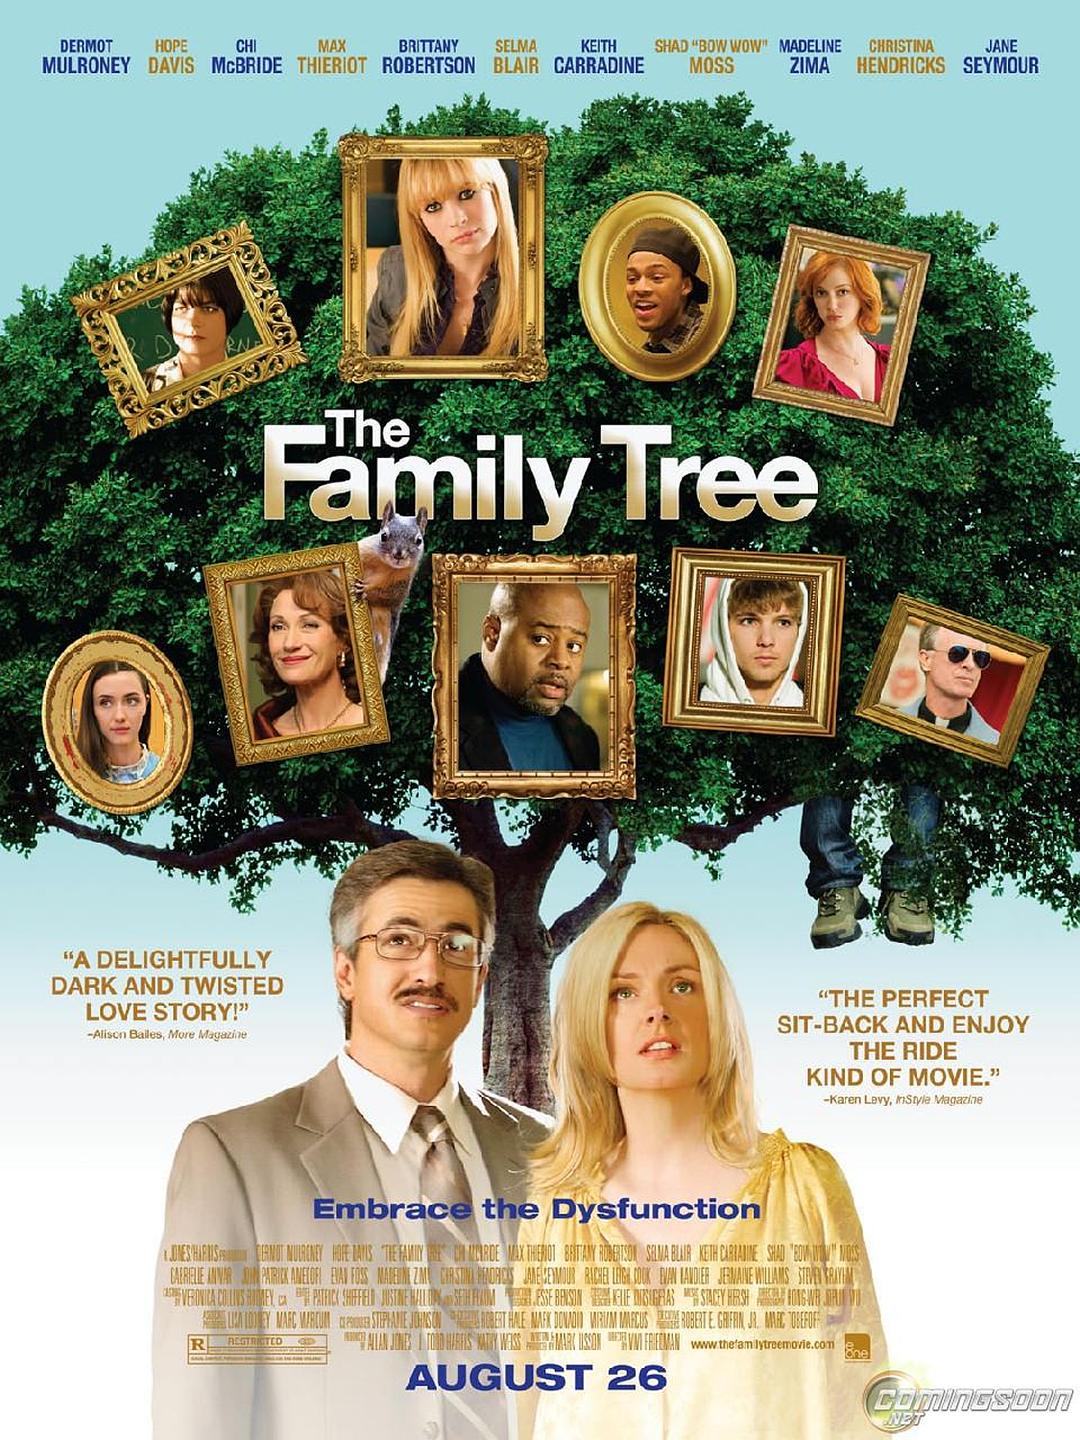  The.Family.Tree.2011.LIMITED.RERIP.1080p.BluRay.x264-PSYCHD 6.55GB-1.png